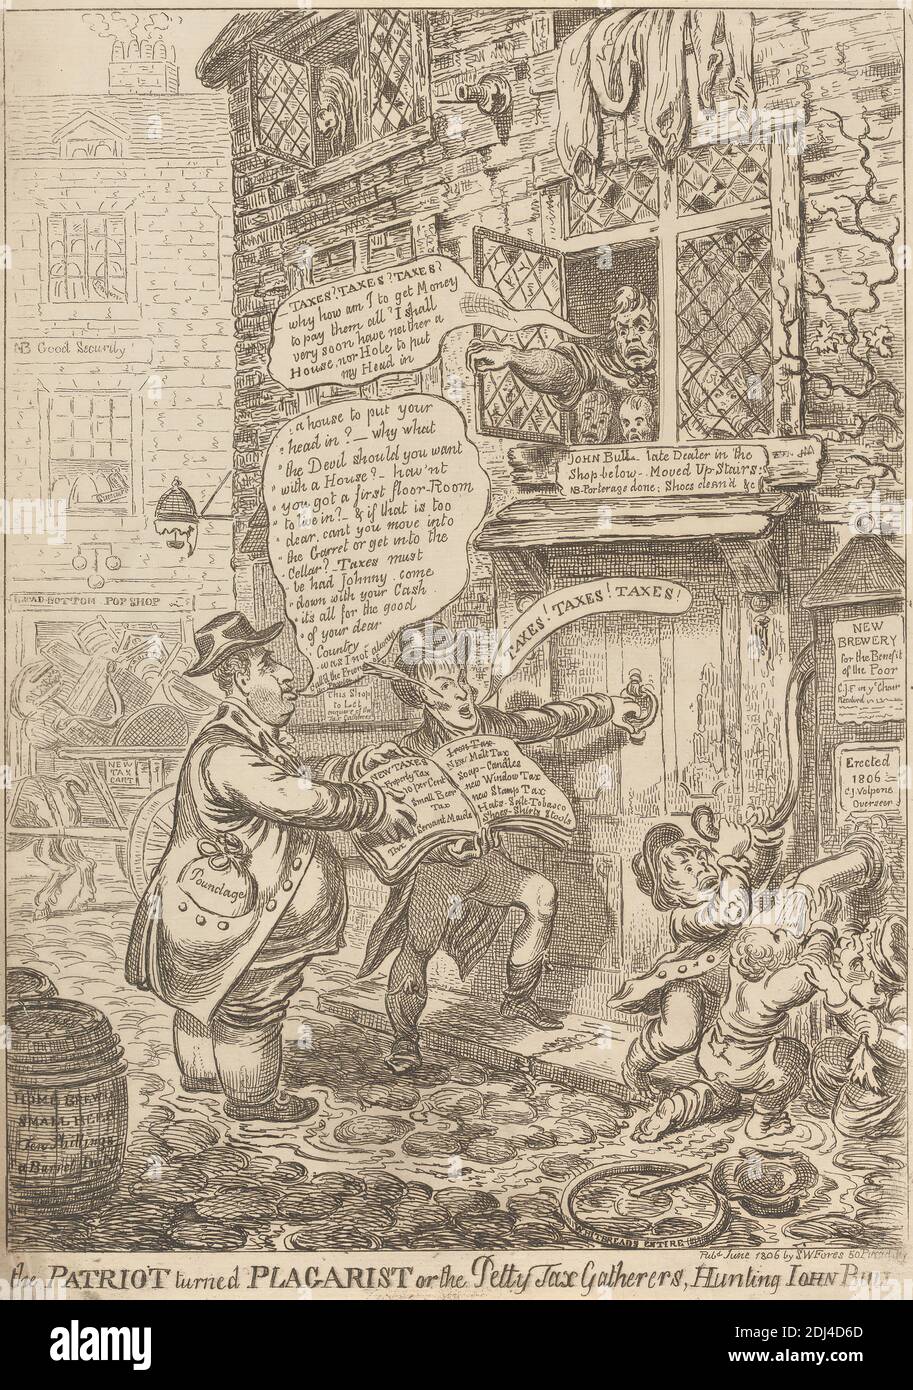 The Patriot turned Plagiarist, or the Petty Tax Gatherers Hunting John Bull, Charles Williams, Active 1796–1830, British, after James Gillray, 1757–1815, British, 1806, Etching Stockfoto